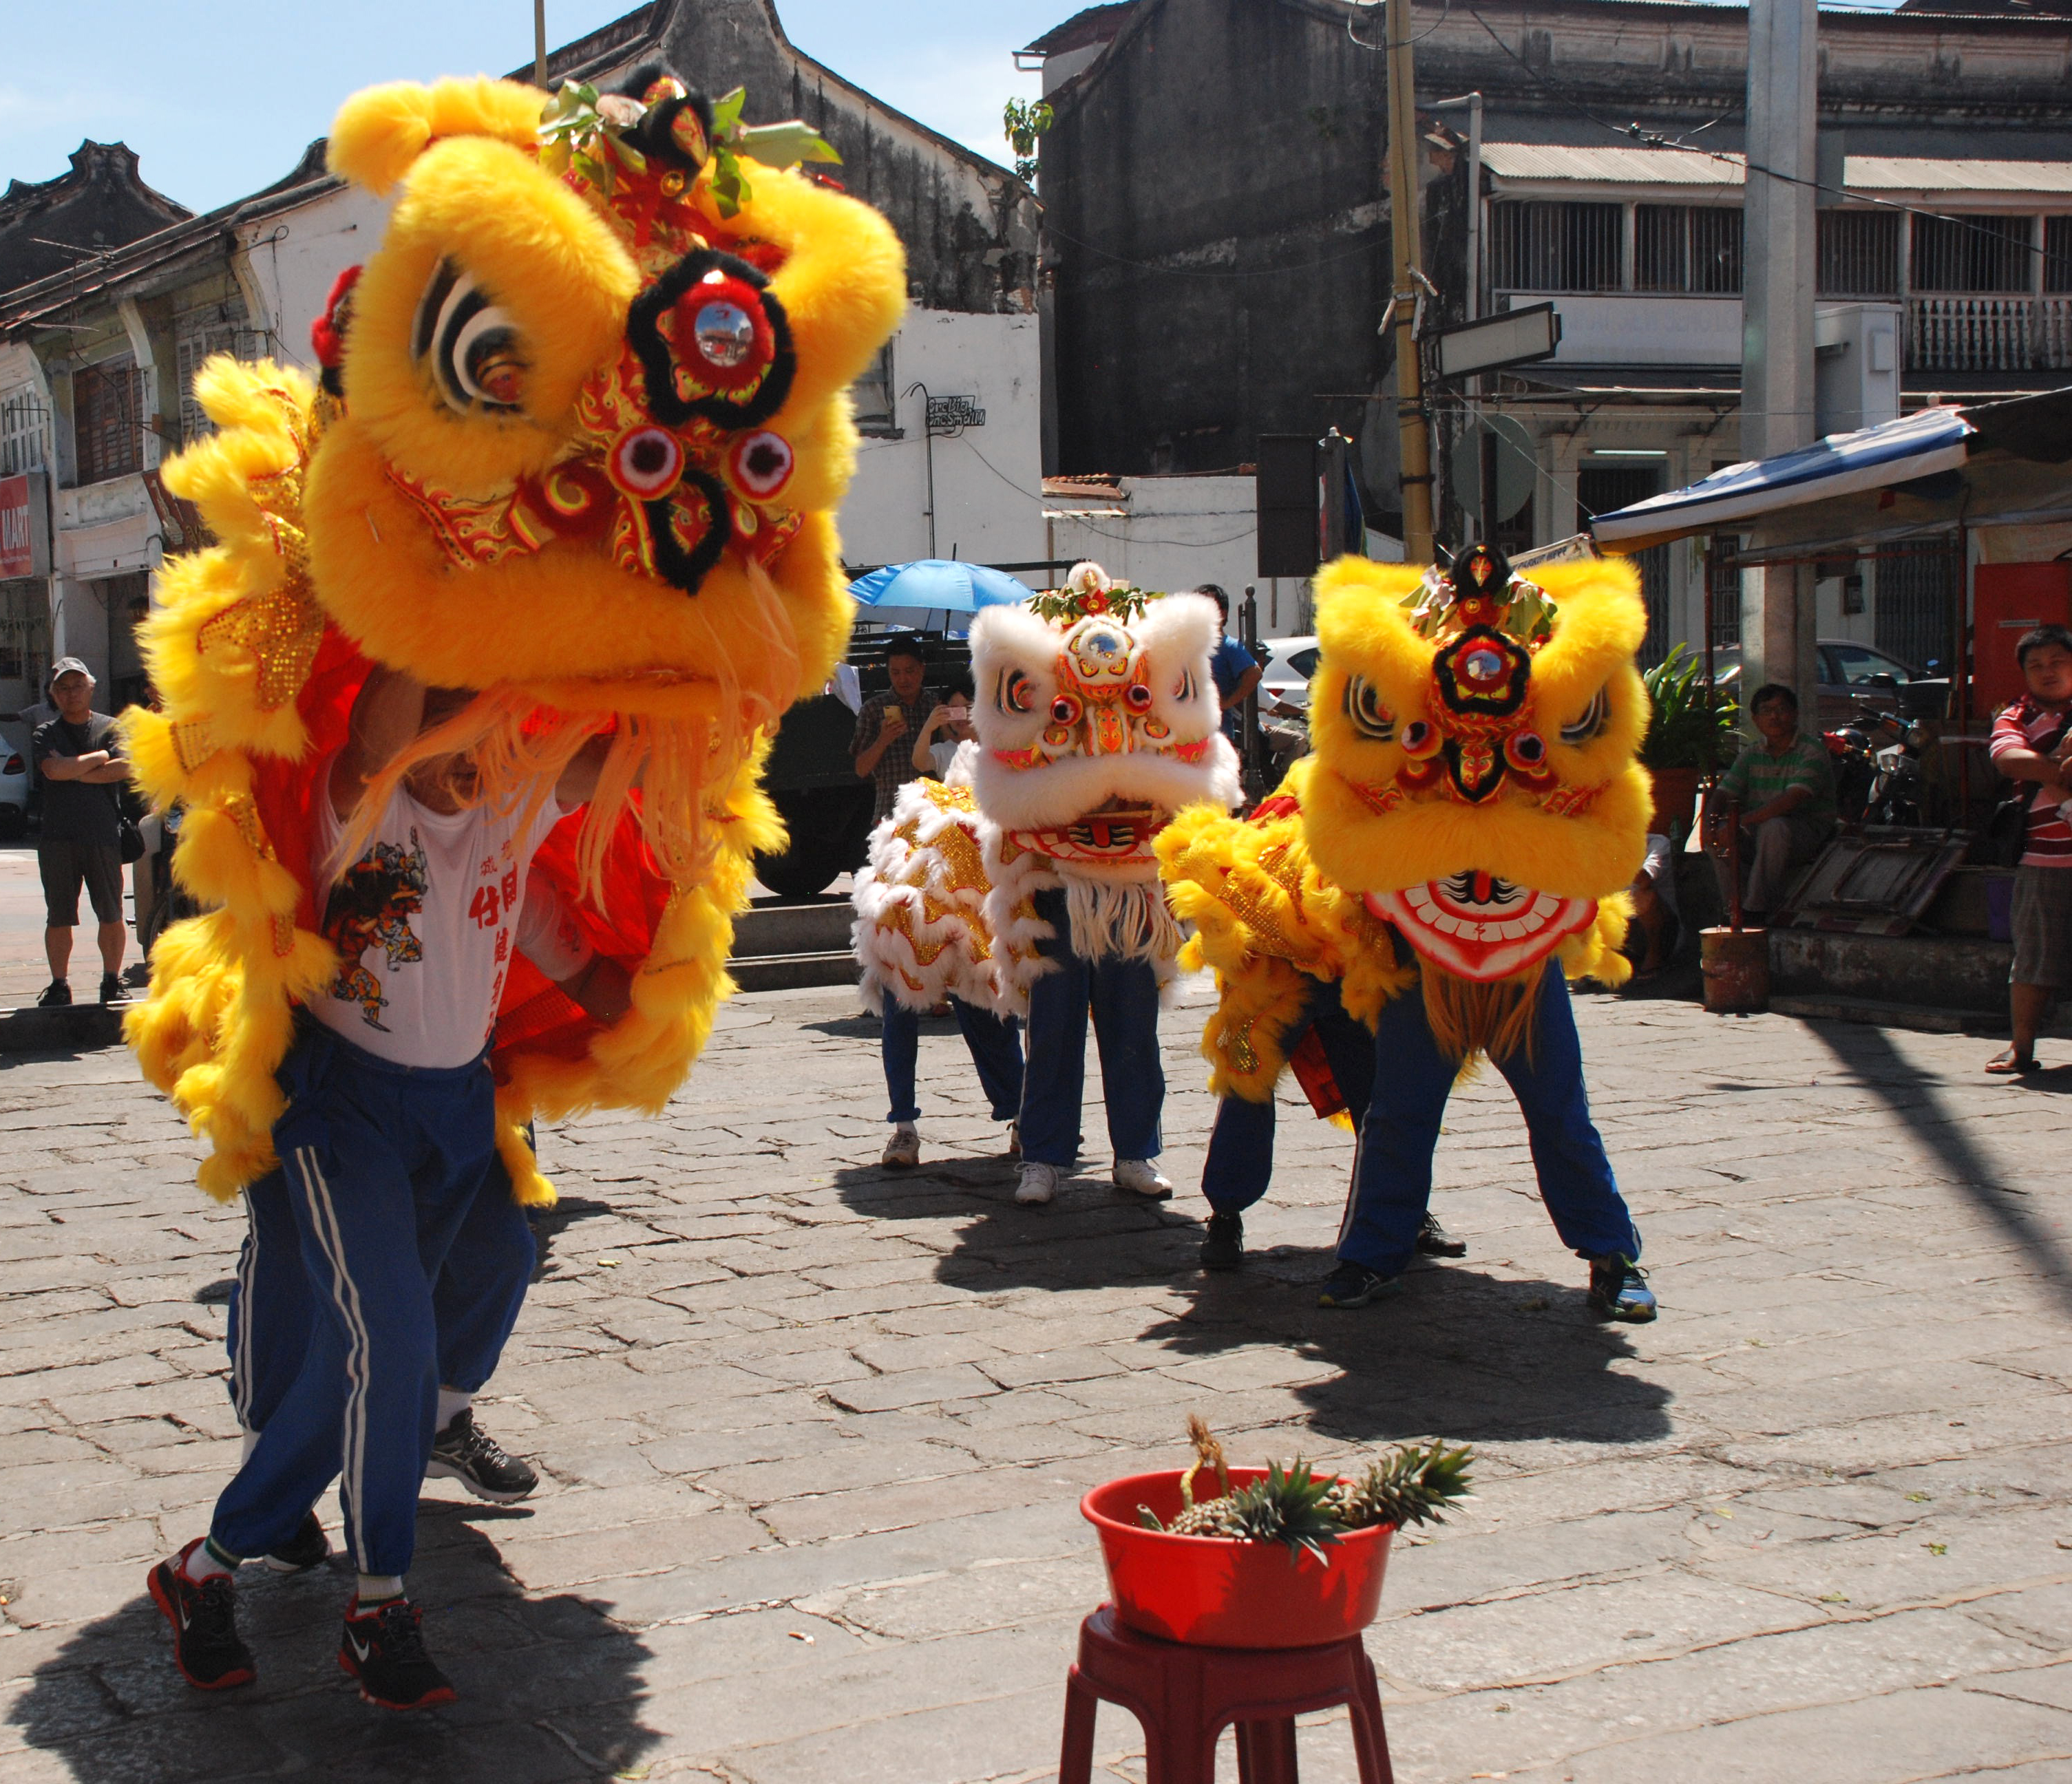 The lion comes alive during Chinese New Year in Penang